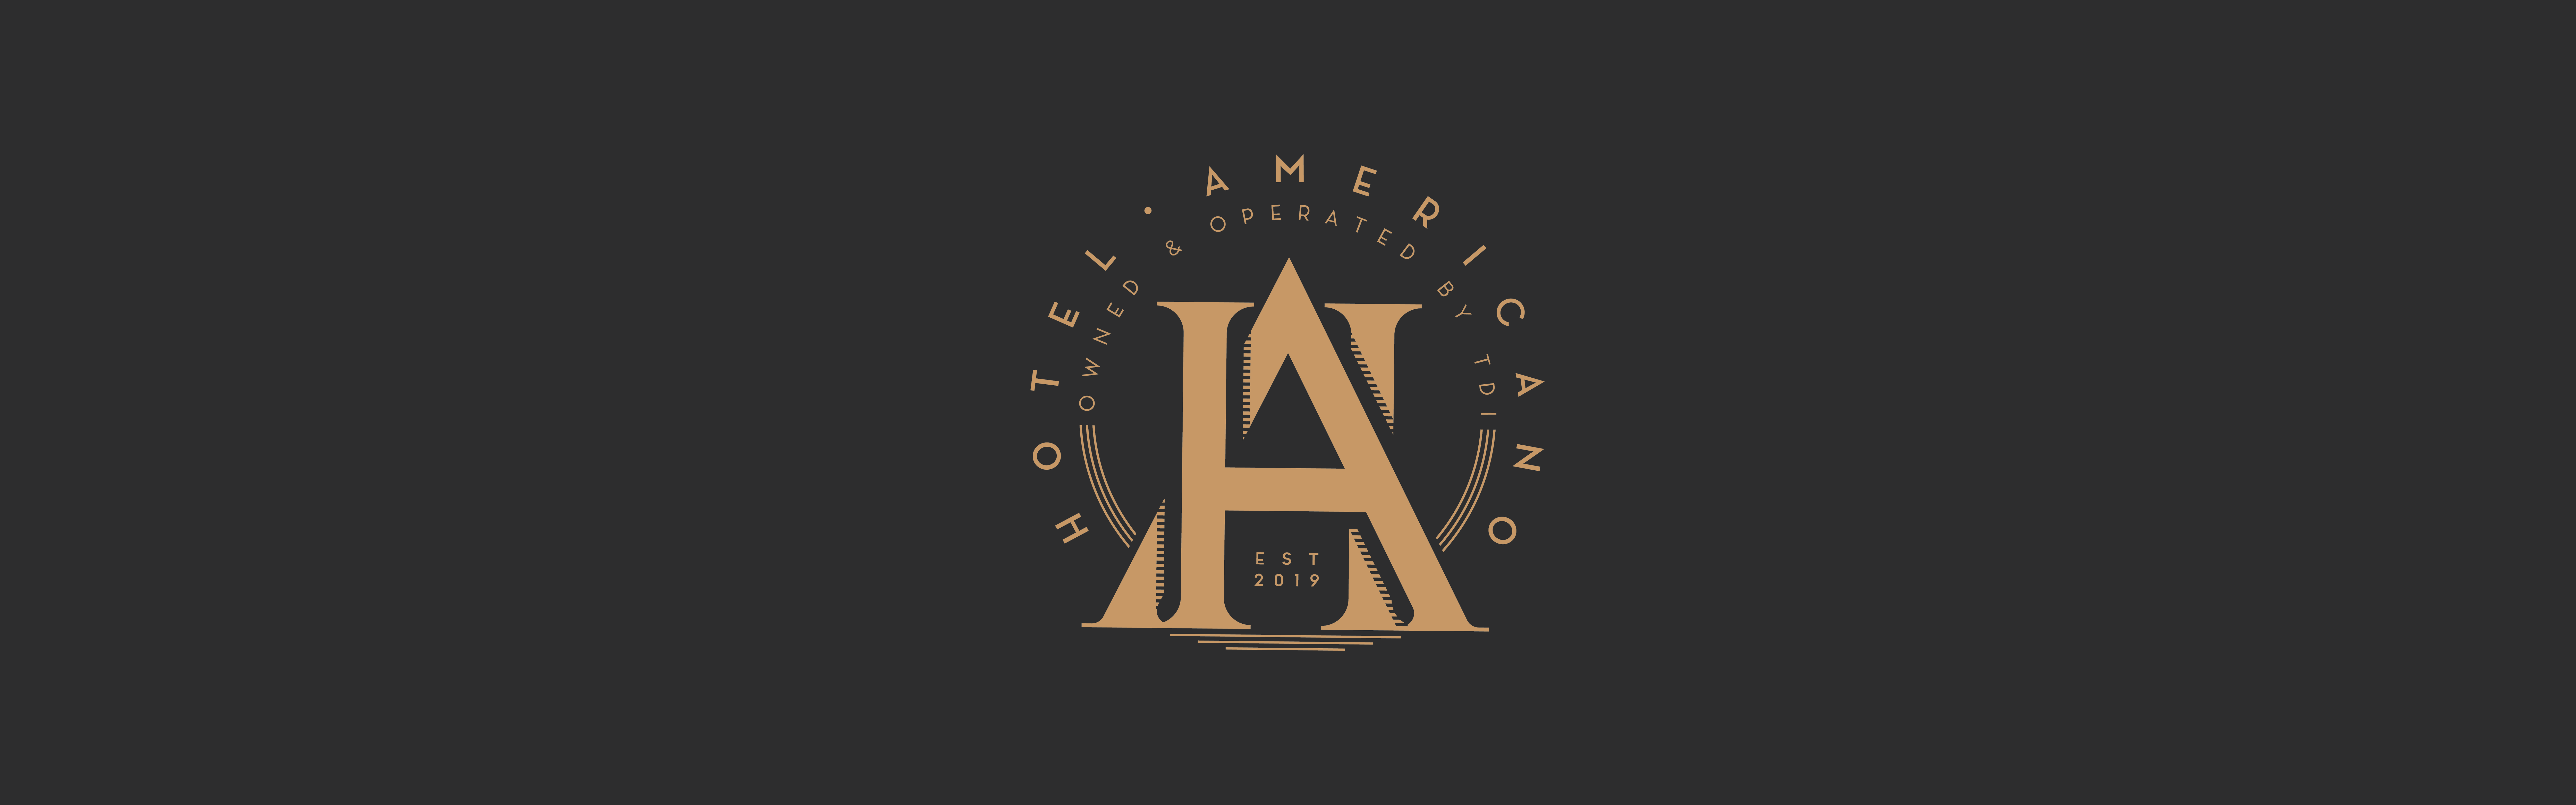 The image shows a graphic logo with the letter "a" at the center surrounded by the text "Hotel Americano" arranged in a circular fashion, with smaller text "est. 2019.